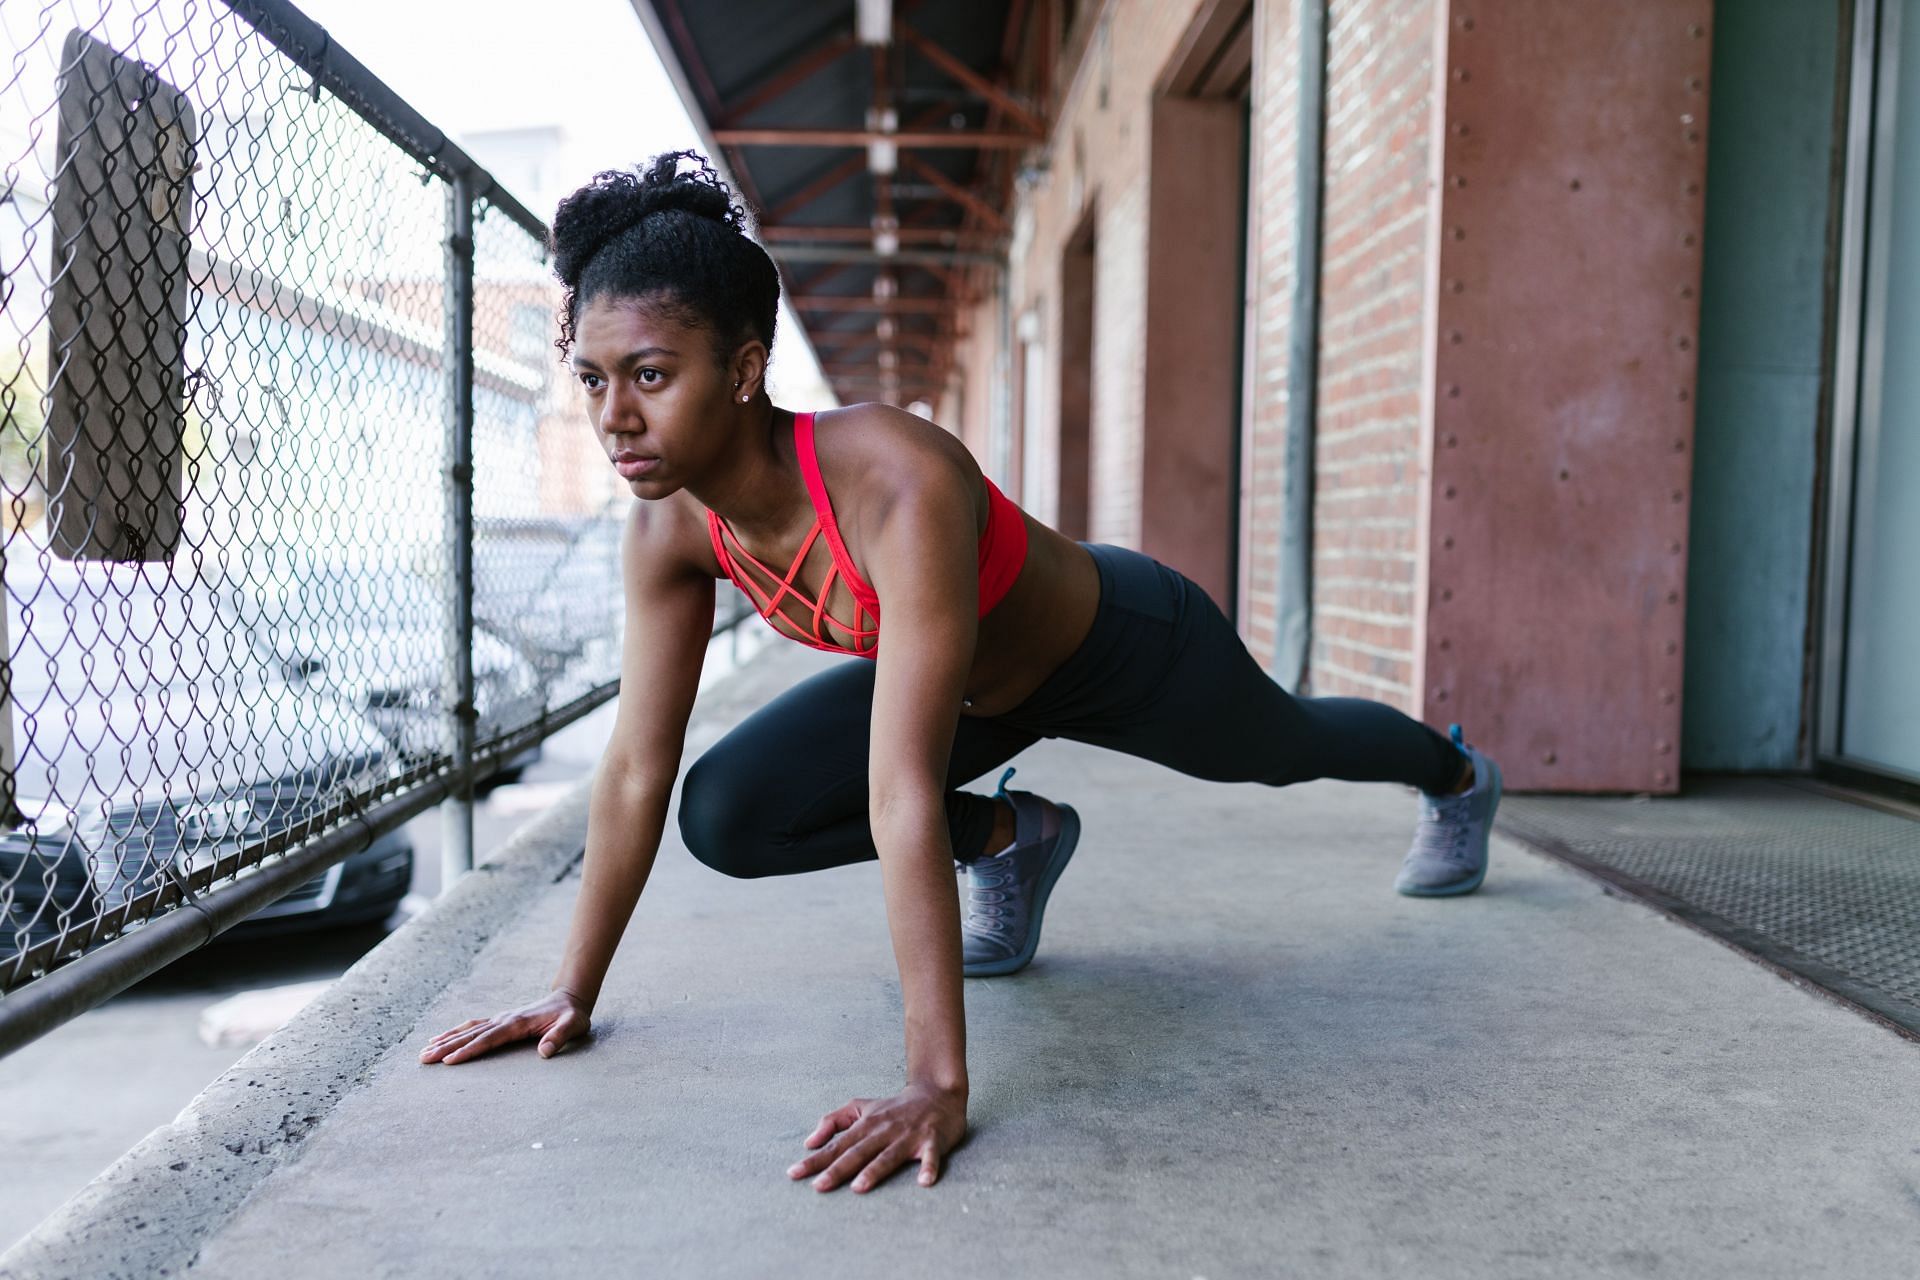 Bodyweight exercises can be done any time, anywhere. (Image via Pexels/ Rodnae Productions)